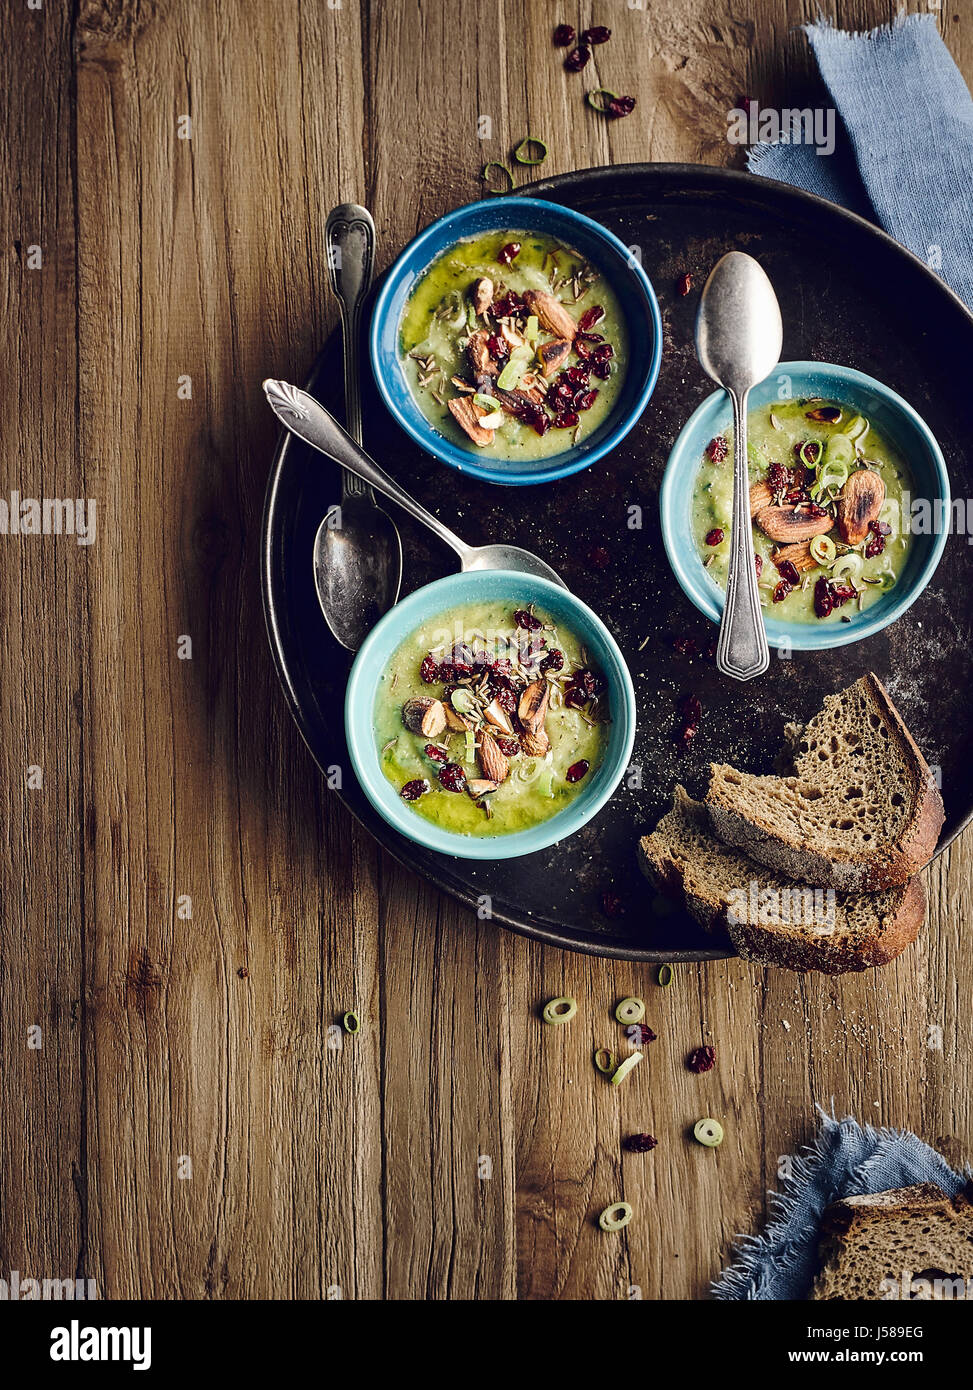 Brussel sprouts soup with salted almonds and barberries Stock Photo